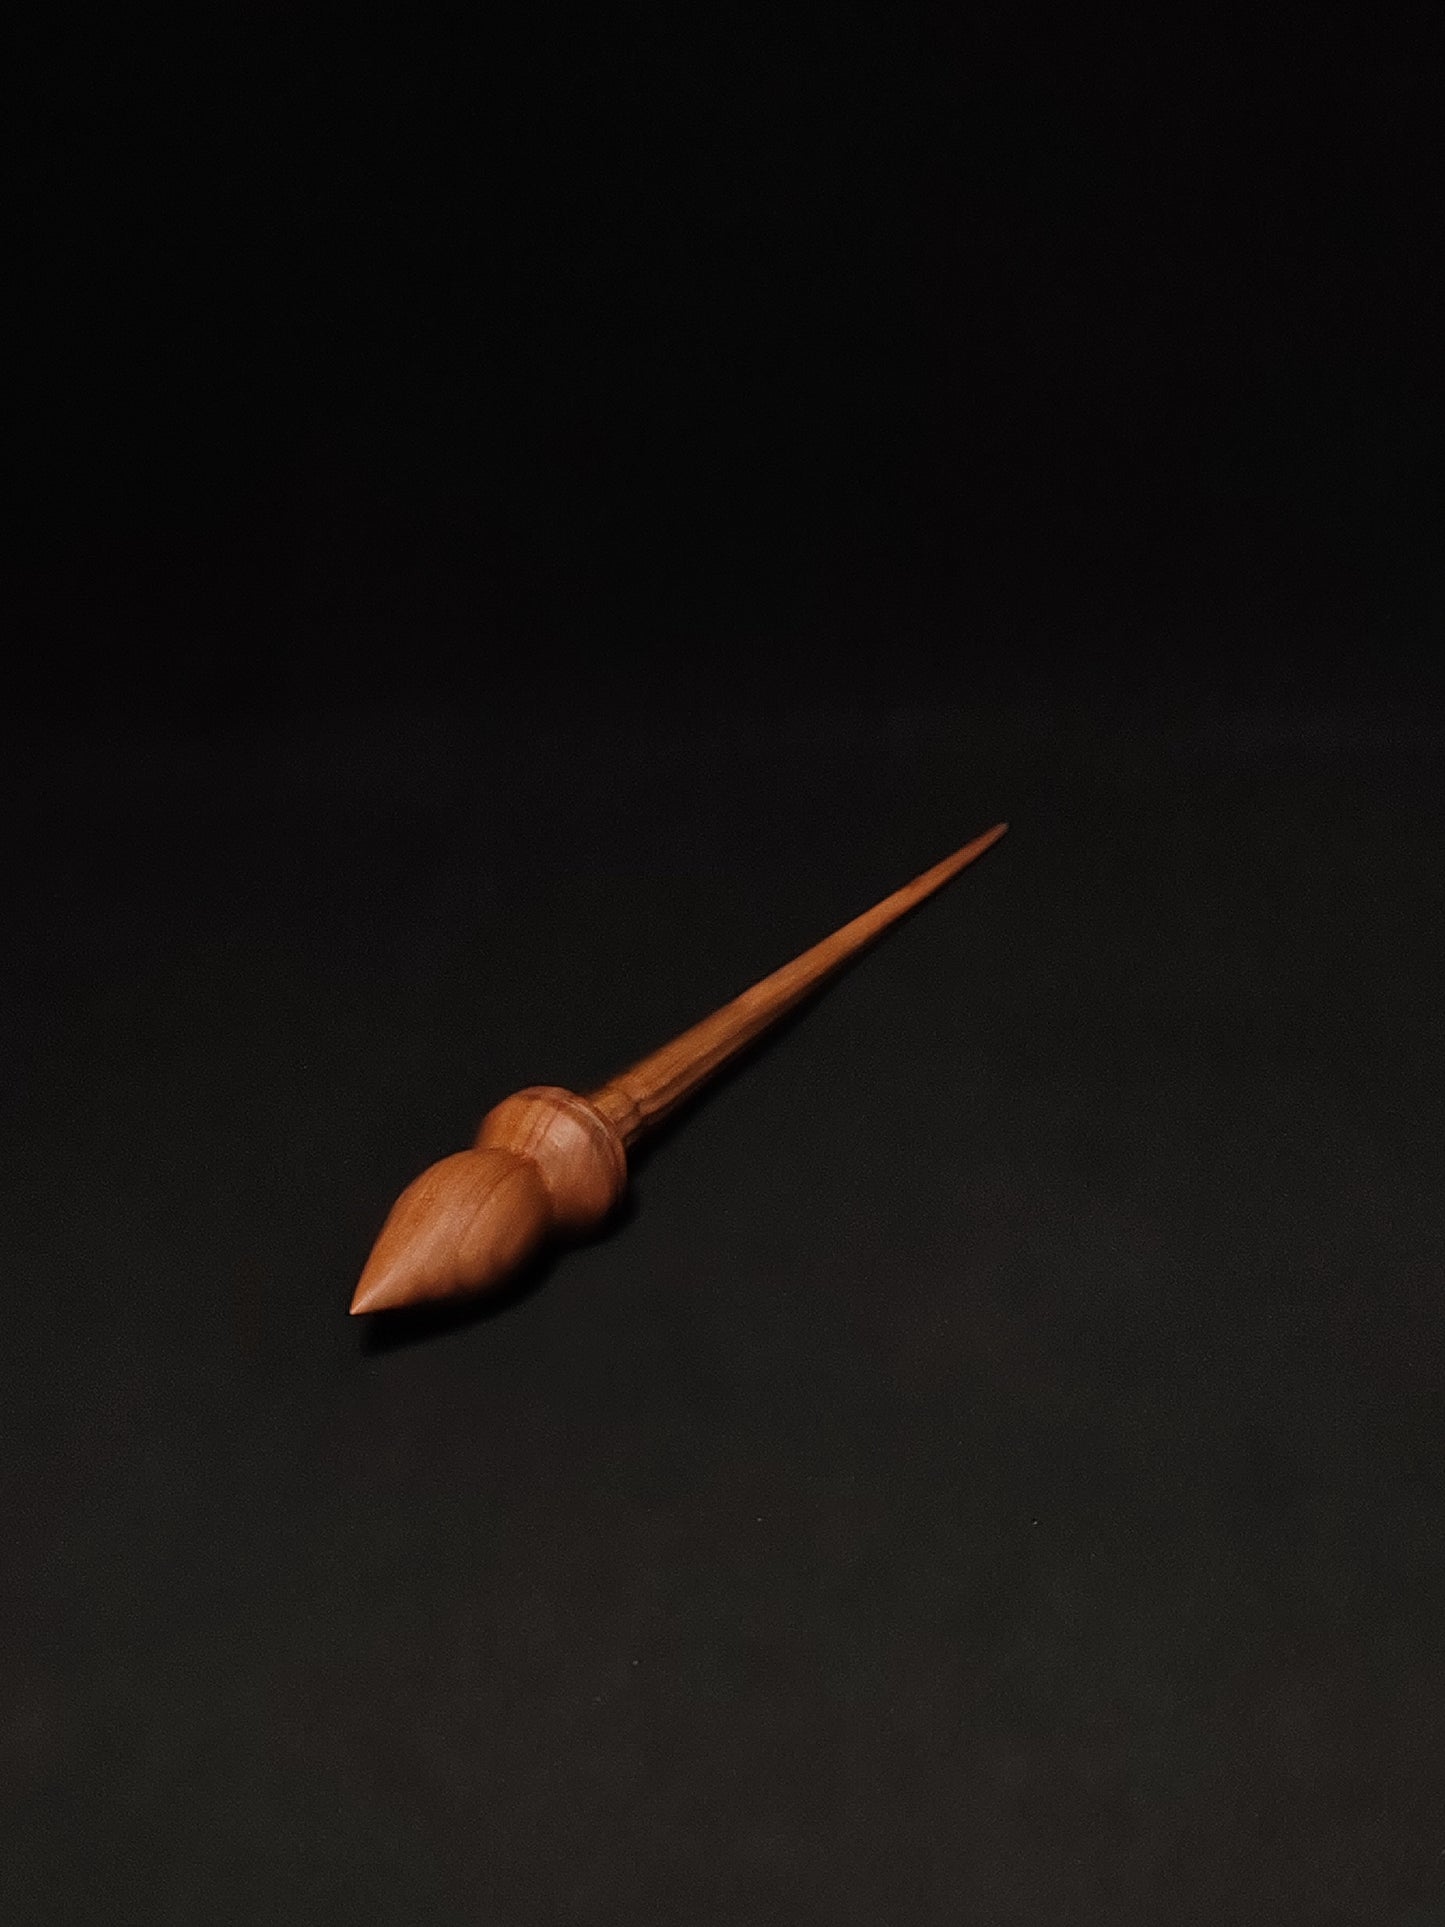 Support Spindle: Walnut (26 cm / 10.24 inches, 23 g / 0.81 oz) Covered with Protective Beeswax